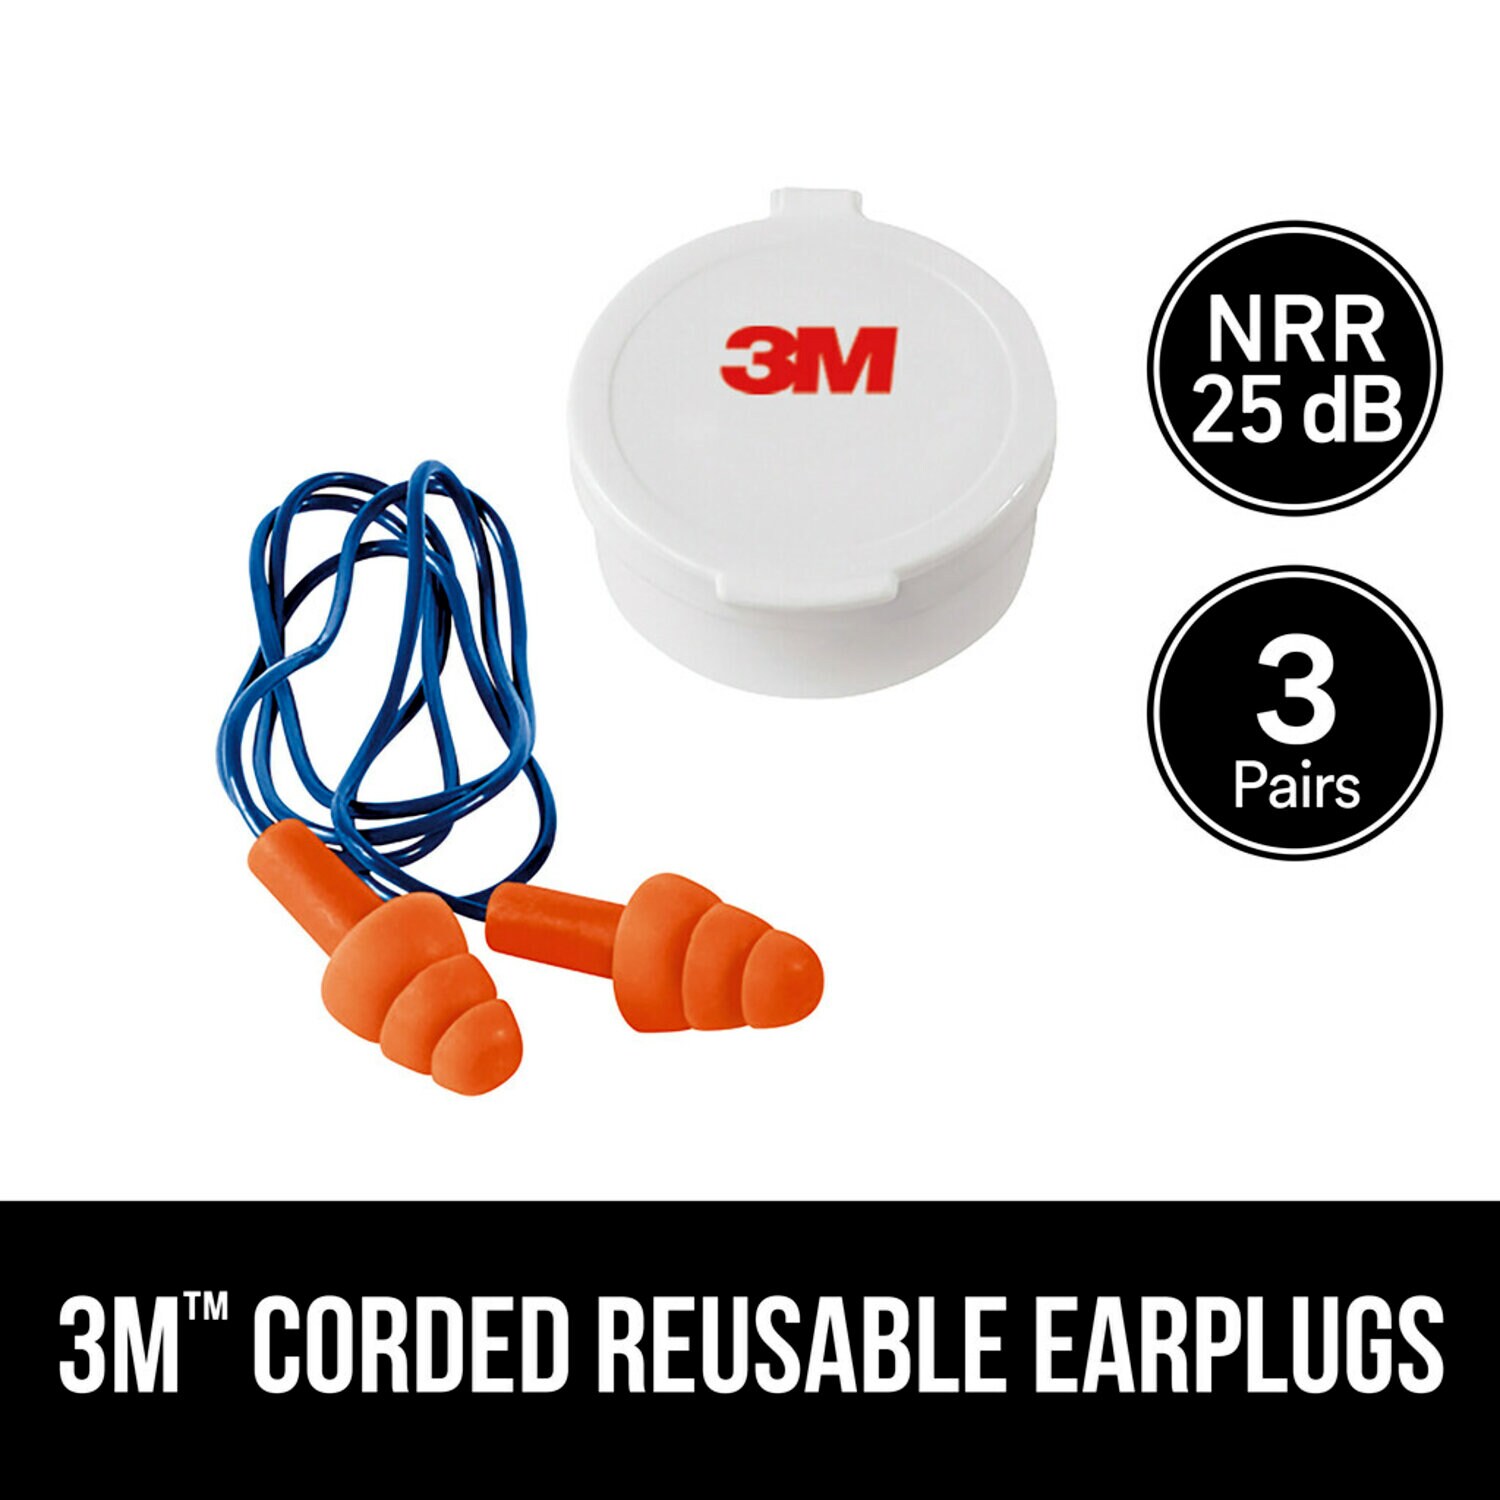 7100158585 - 3M Corded Reusable Earplugs, 90716H3-DC, 3 pairs with case per pack, 10
packs/case